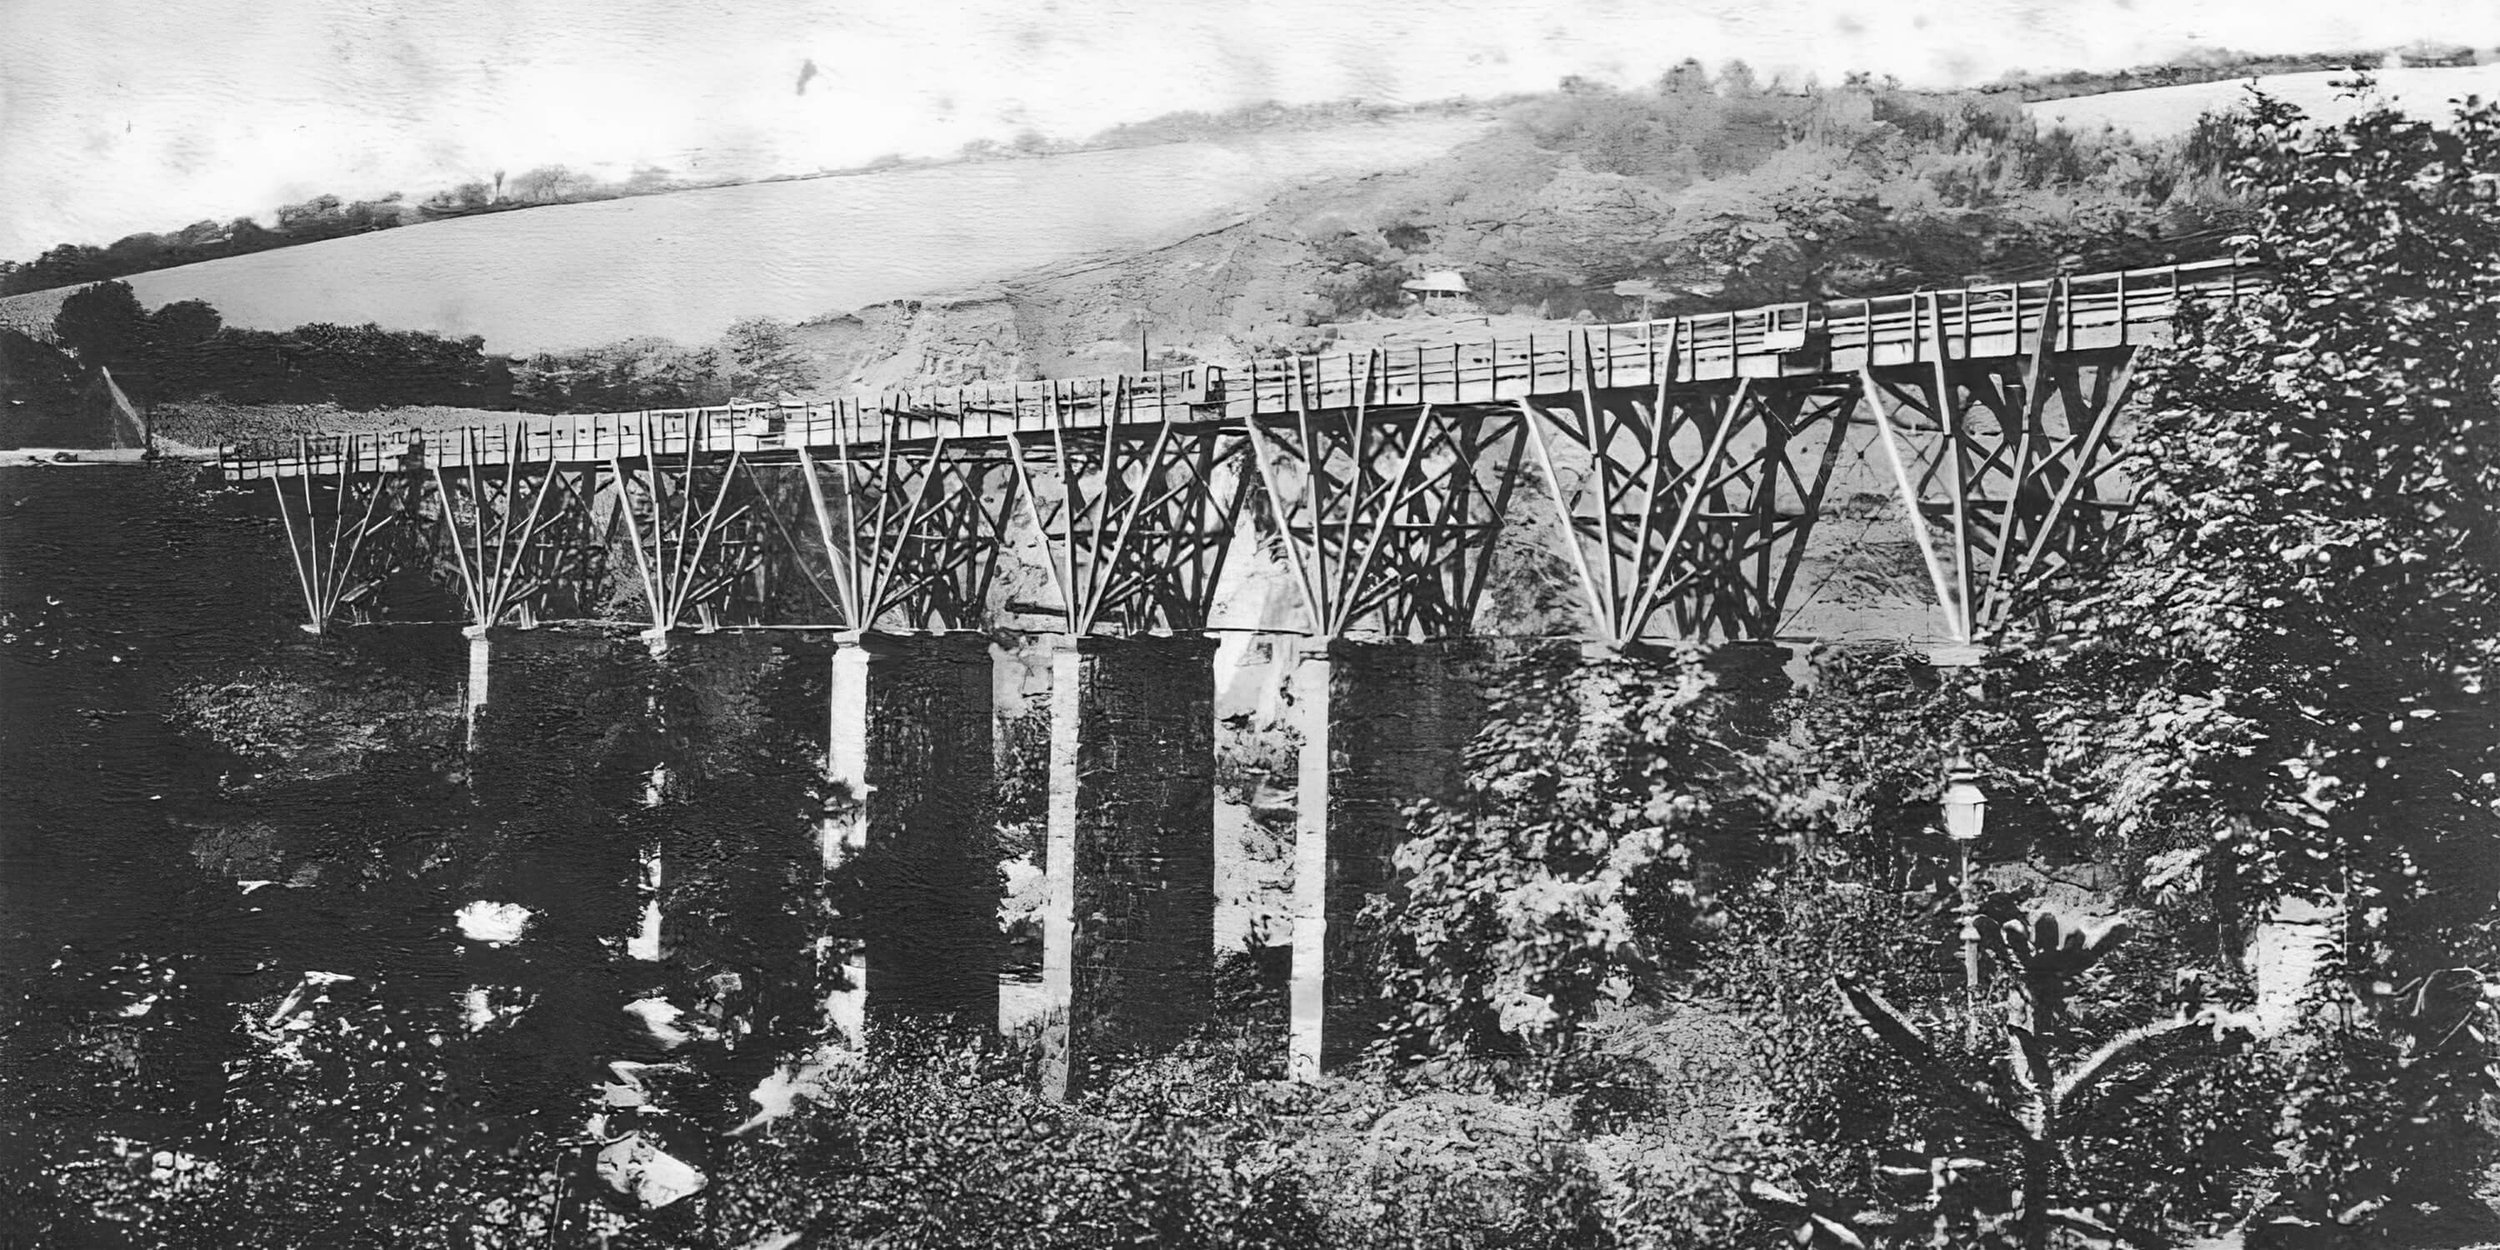 The original timber St Austell viaduct, Cornwall. Built by Isambard Kingdom Brunel for the broad-gauge Cornwall Railway which opened in 1859 (Wikimedia Commons).